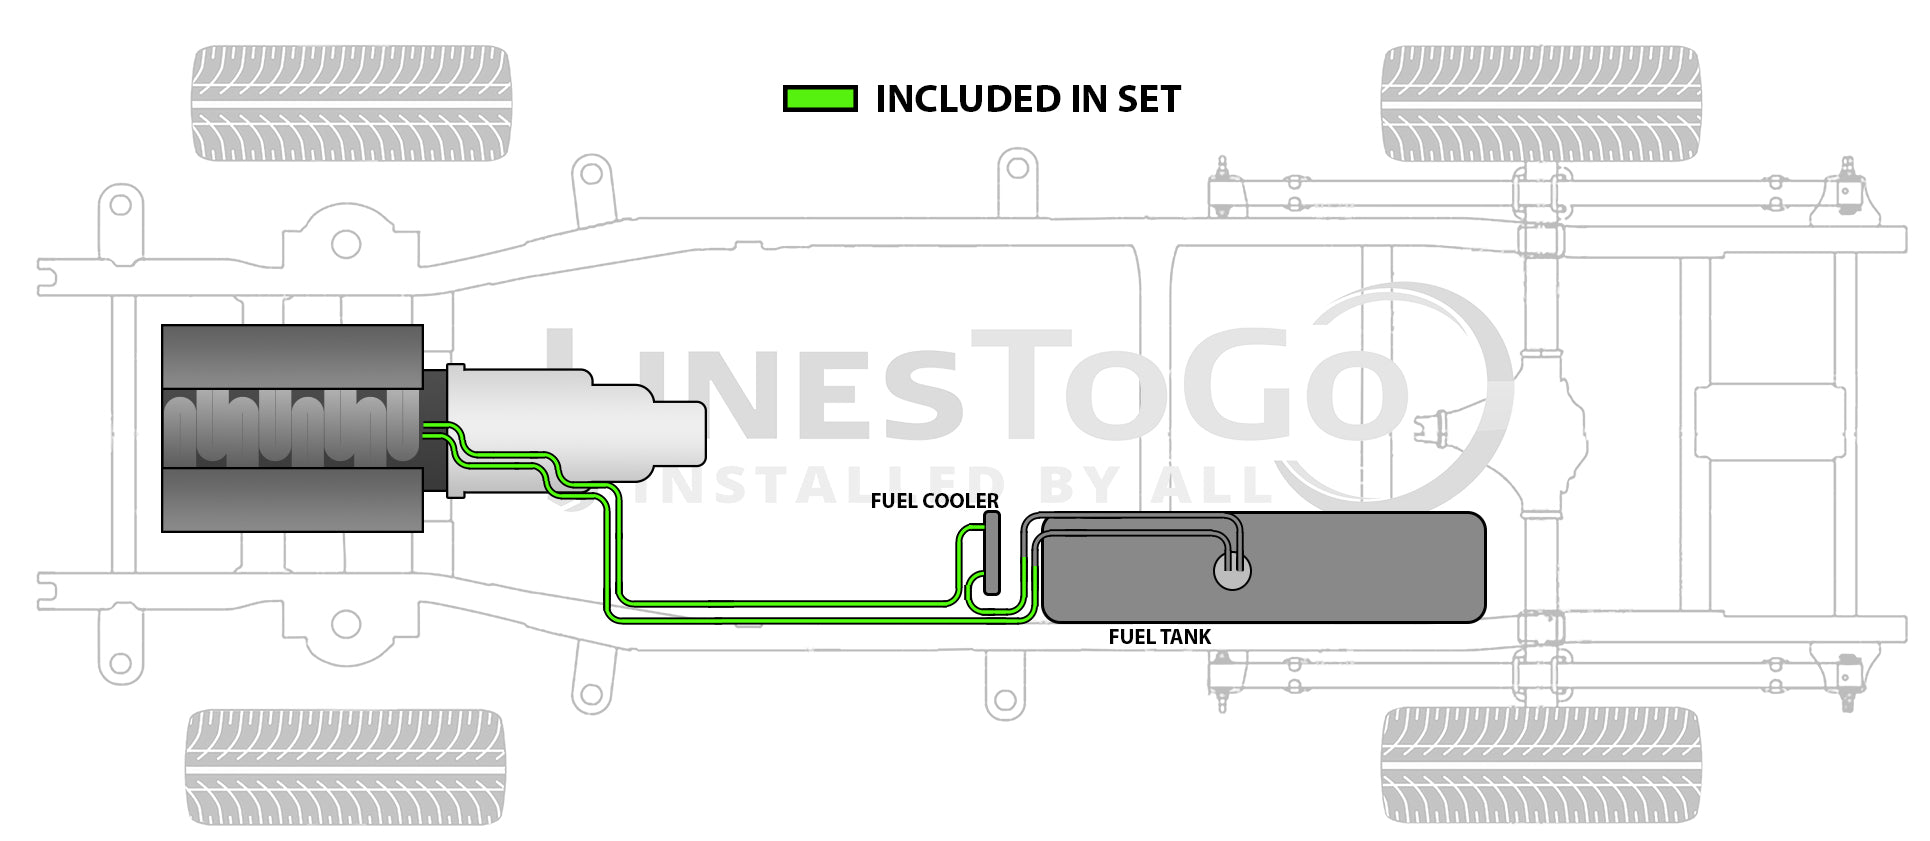 Chevy Silverado Fuel Line Set 2001 C/K2500HD/3500 Crew Cab 6.6L SS887-A1A Stainless Steel